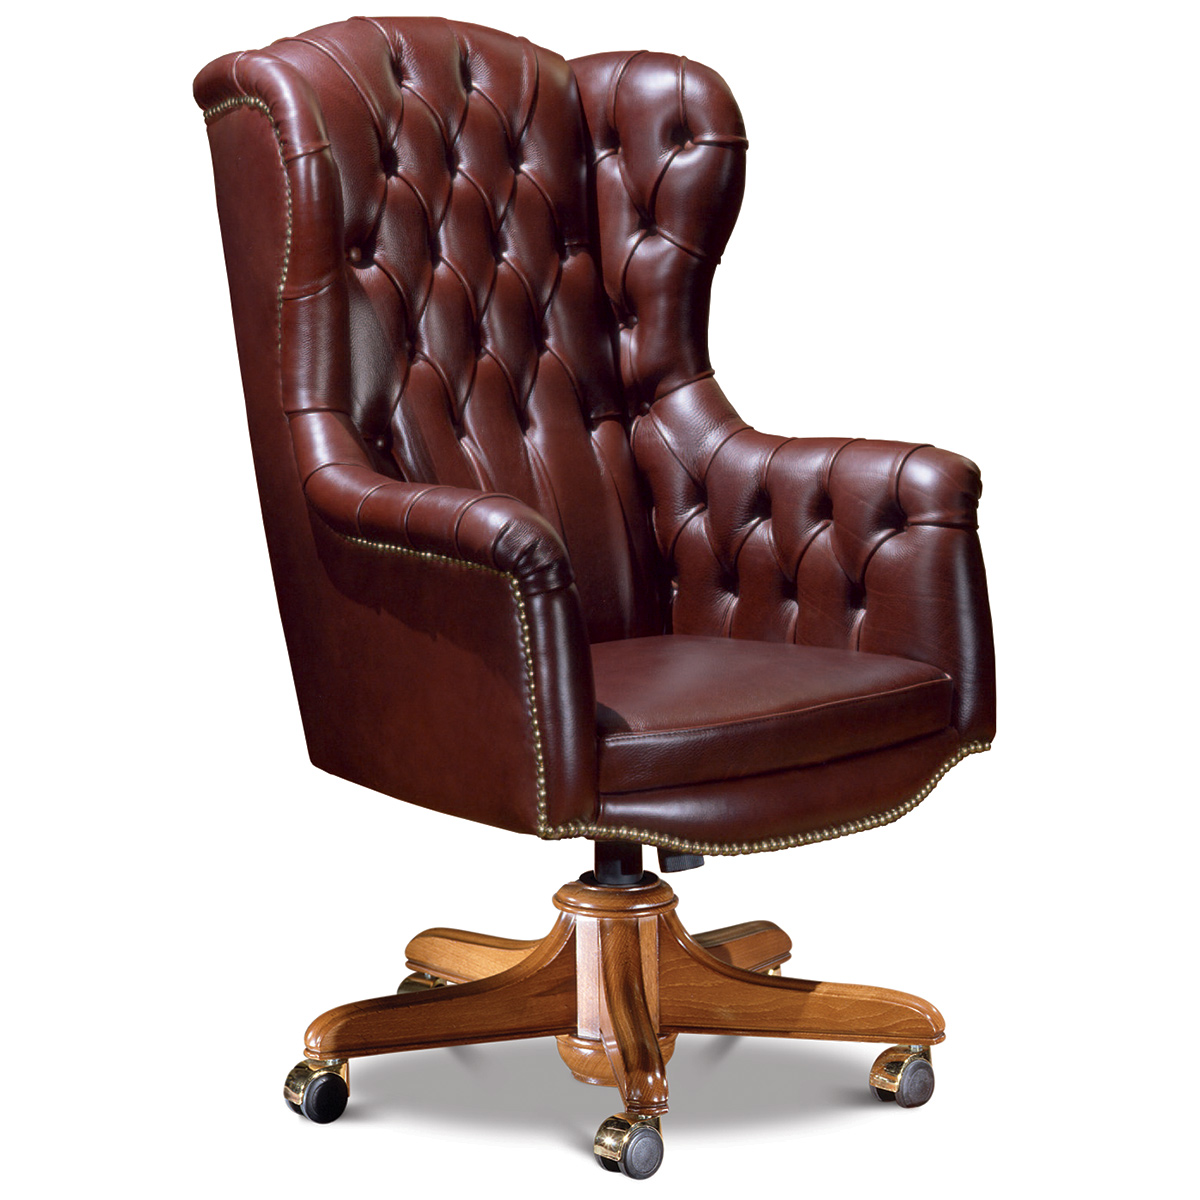 Office armchair “Magnifica” made in italy su misura